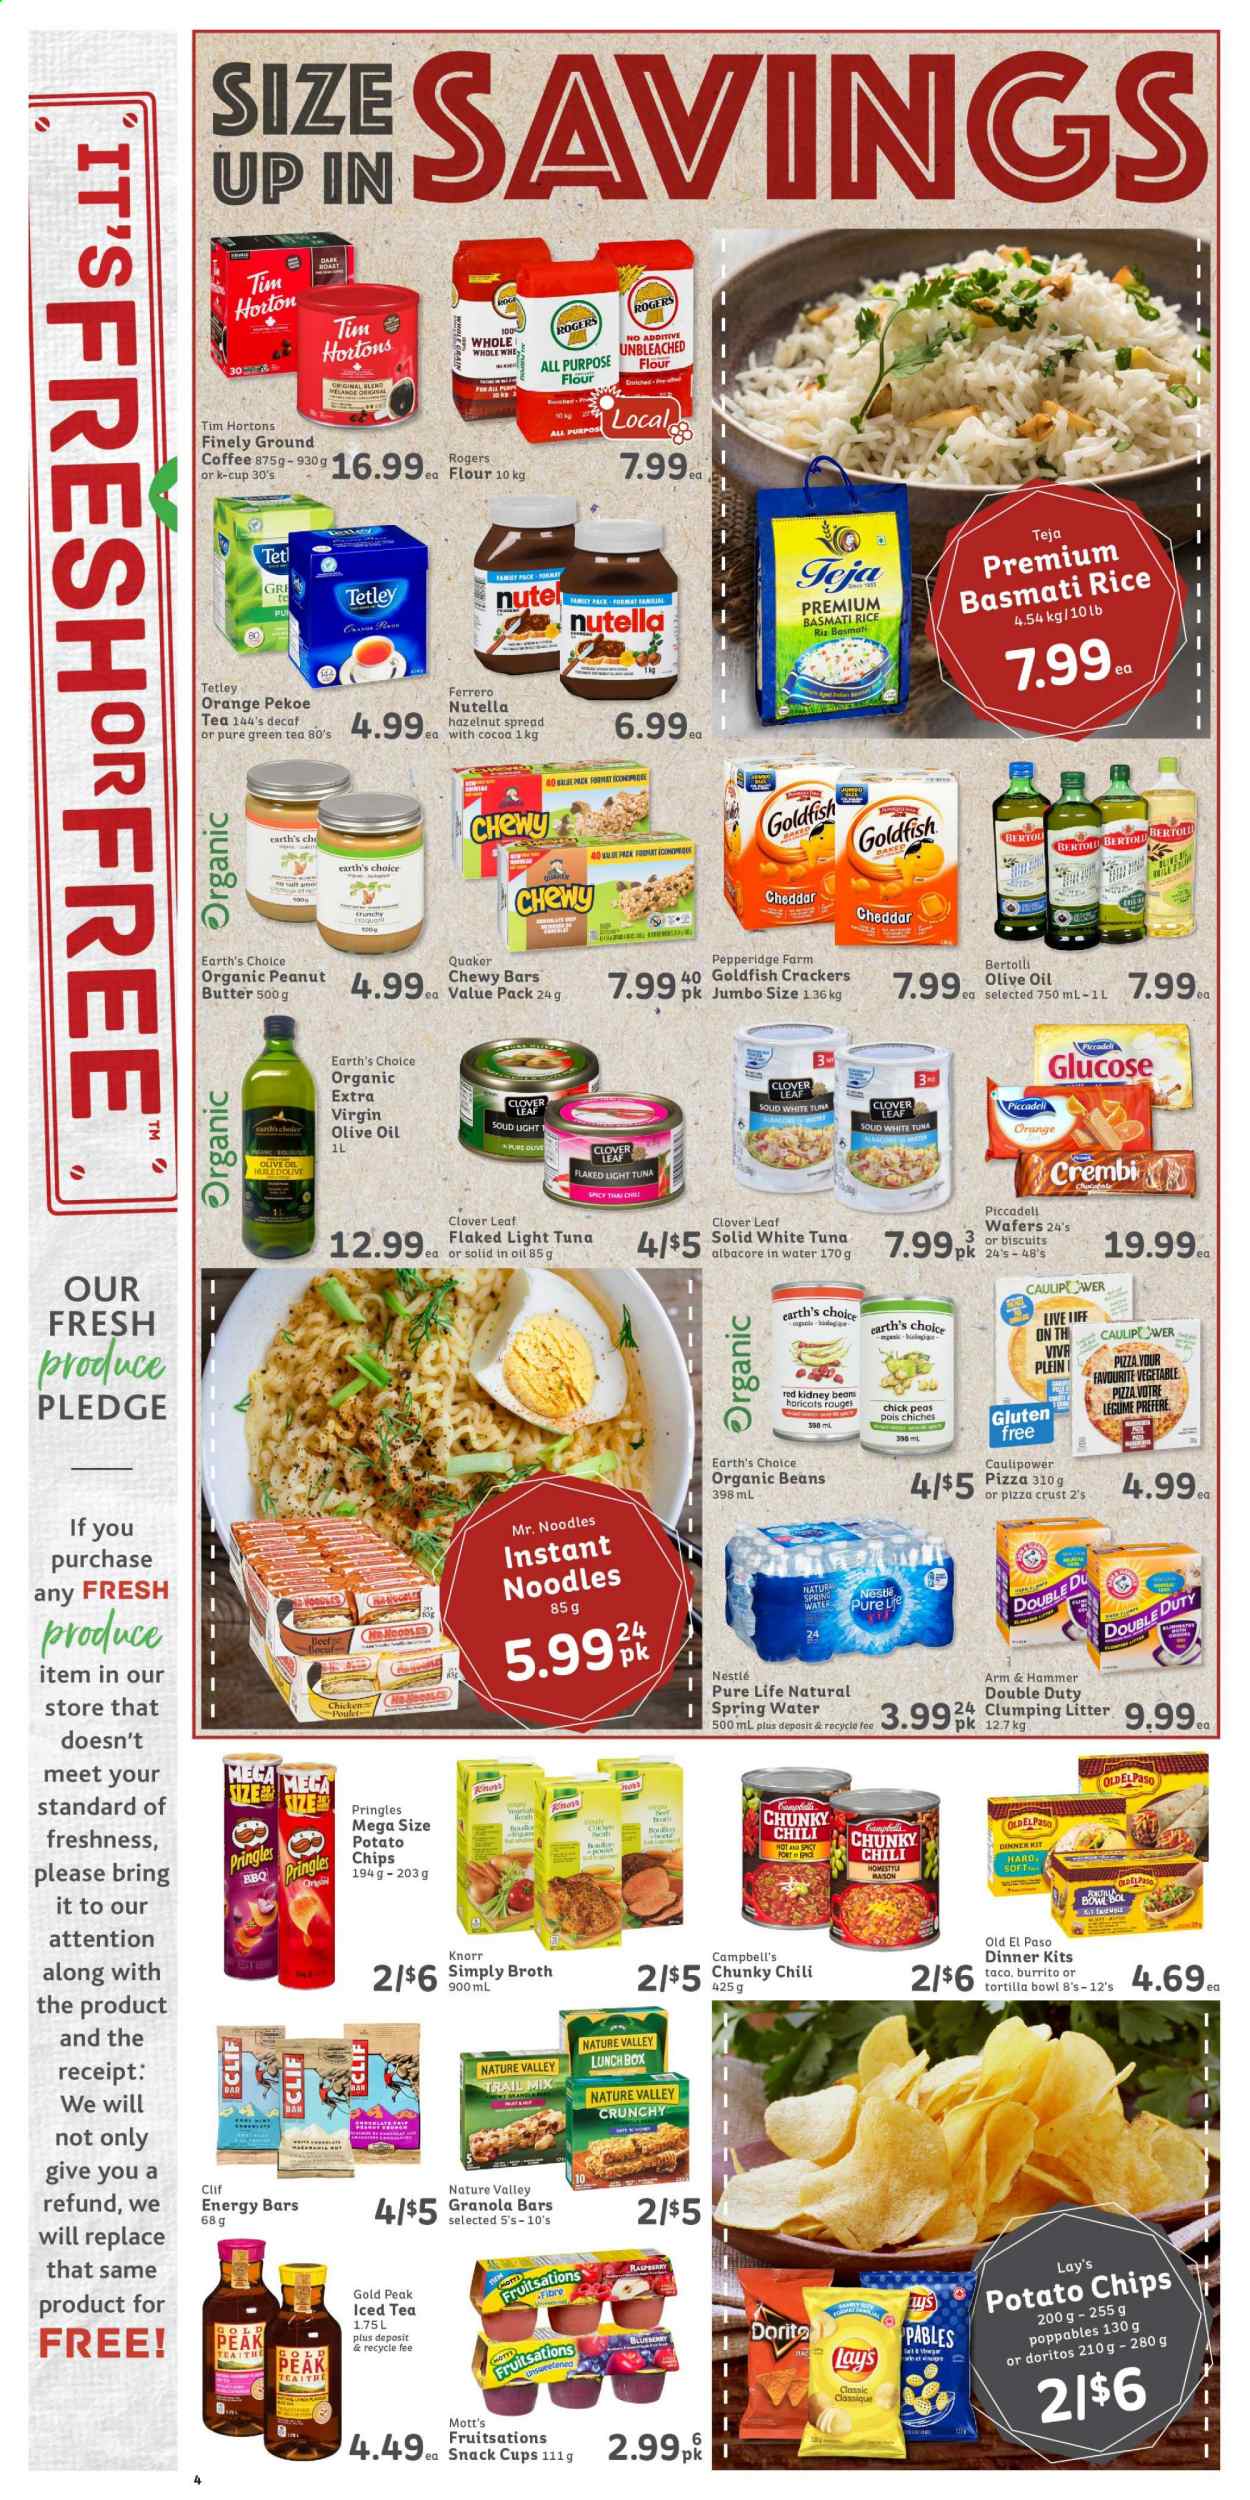 thumbnail - IGA Simple Goodness Flyer - February 12, 2021 - February 18, 2021 - Sales products - tortillas, Old El Paso, peas, Mott's, tuna, Campbell's, pizza, instant noodles, dinner kit, burrito, Quaker, noodles, Bertolli, Clover, wafers, snack, crackers, biscuit, Doritos, potato chips, Pringles, Lay’s, Goldfish, all purpose flour, ARM & HAMMER, beef broth, chicken broth, oats, broth, kidney beans, light tuna, granola bar, energy bar, Nature Valley, basmati rice, rice, olive oil, peanut butter, hazelnut spread, trail mix, ice tea, spring water, green tea, coffee, ground coffee, coffee capsules, K-Cups, Knorr, Nestlé, Nutella, chips. Page 4.